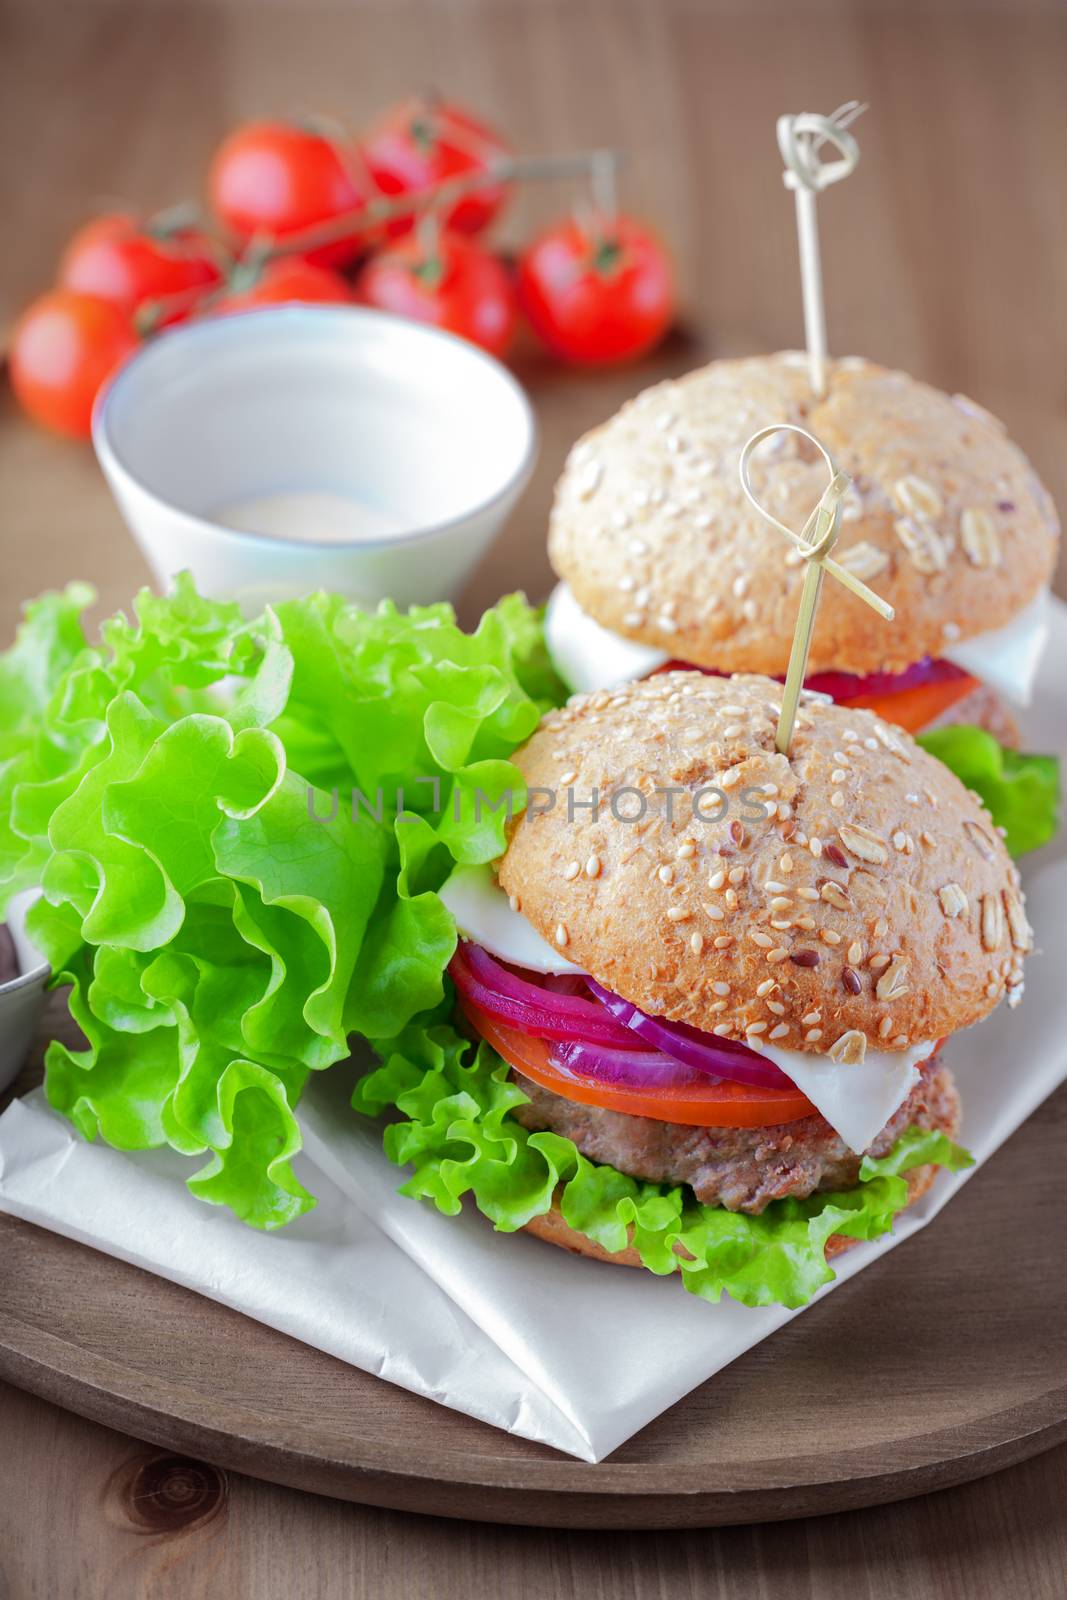 Cheeseburger with salad, onion, tomato and fresh bread